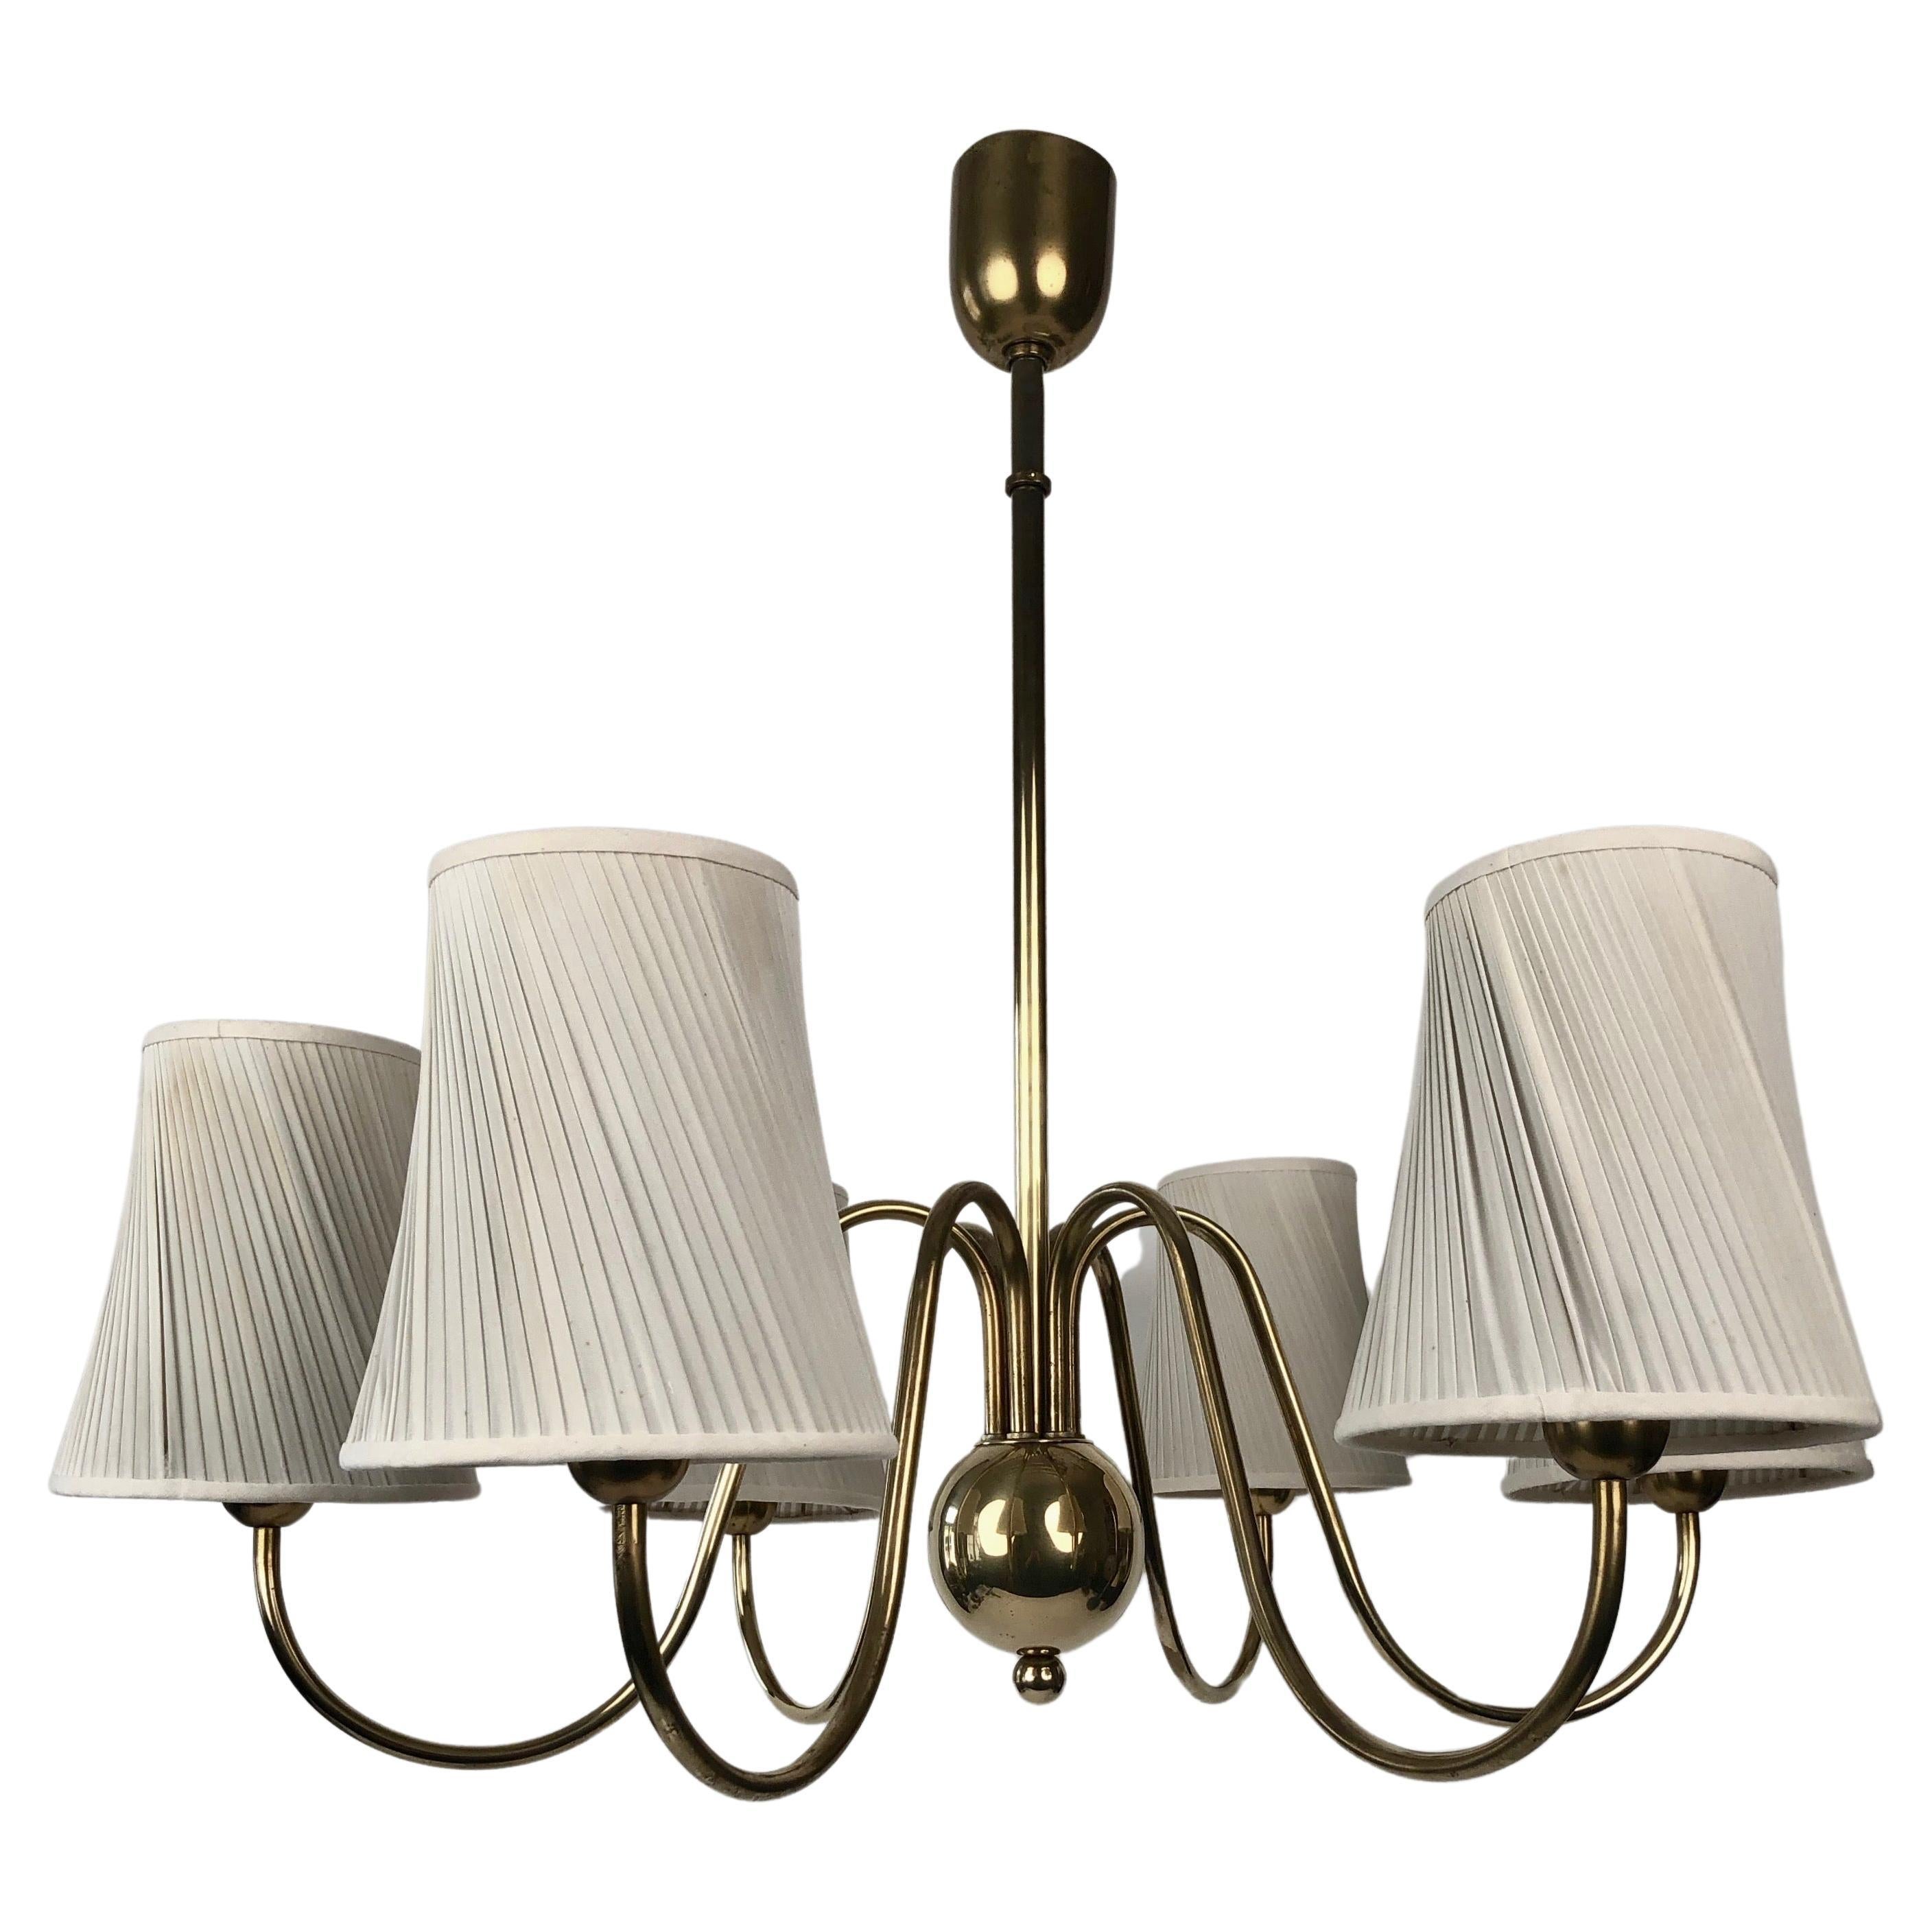 Six Arm chandelier in Brass from Josef Frank with Silk Shades, made in Austria For Sale